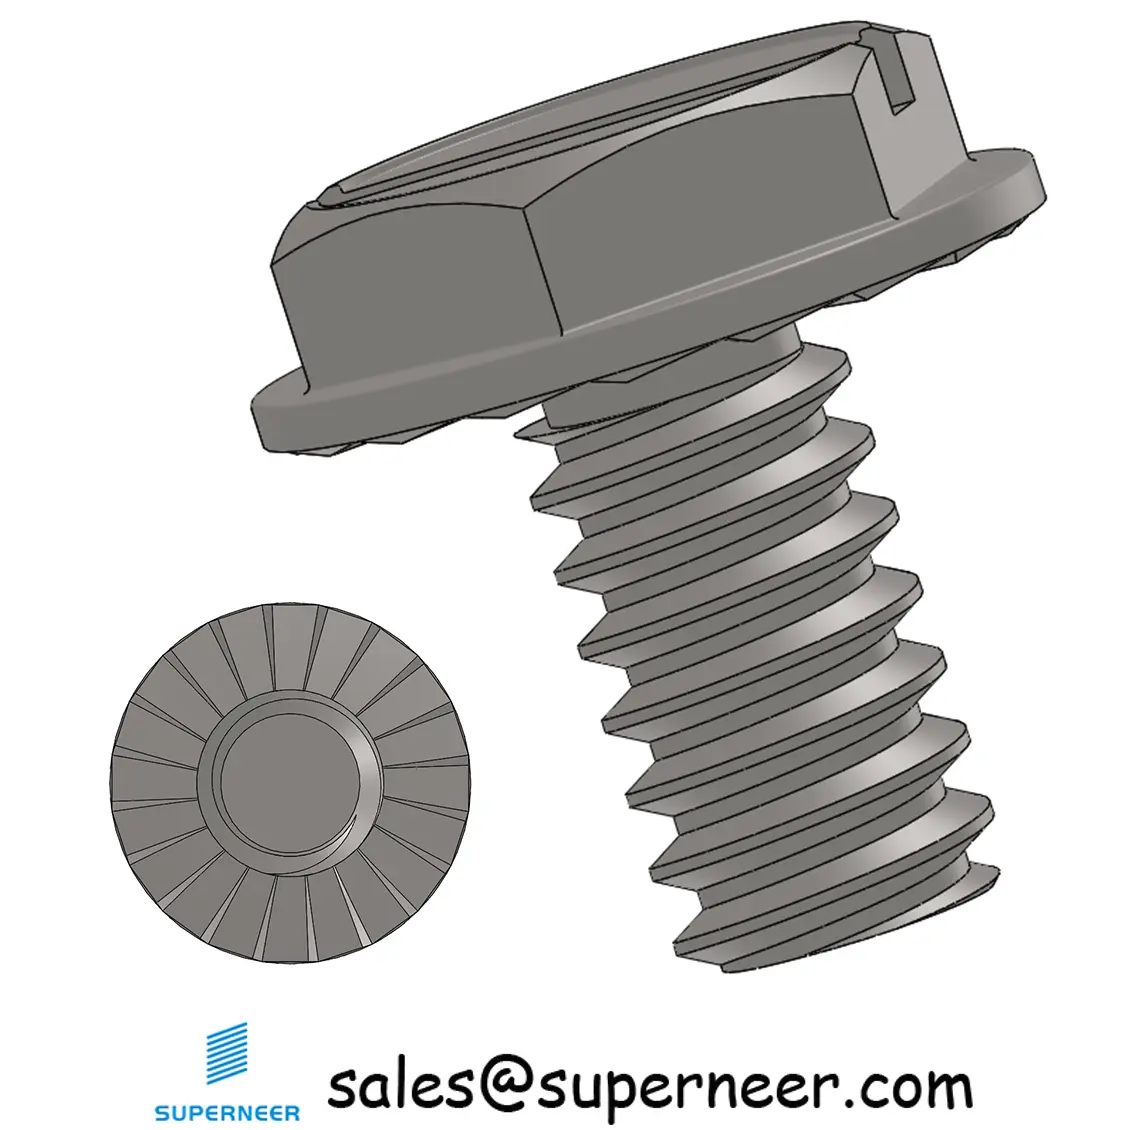 6-32 x 1/4" Indented Hex Washer Serrated Head Slotted Machine Screw SUS304 Stainless Steel Inox